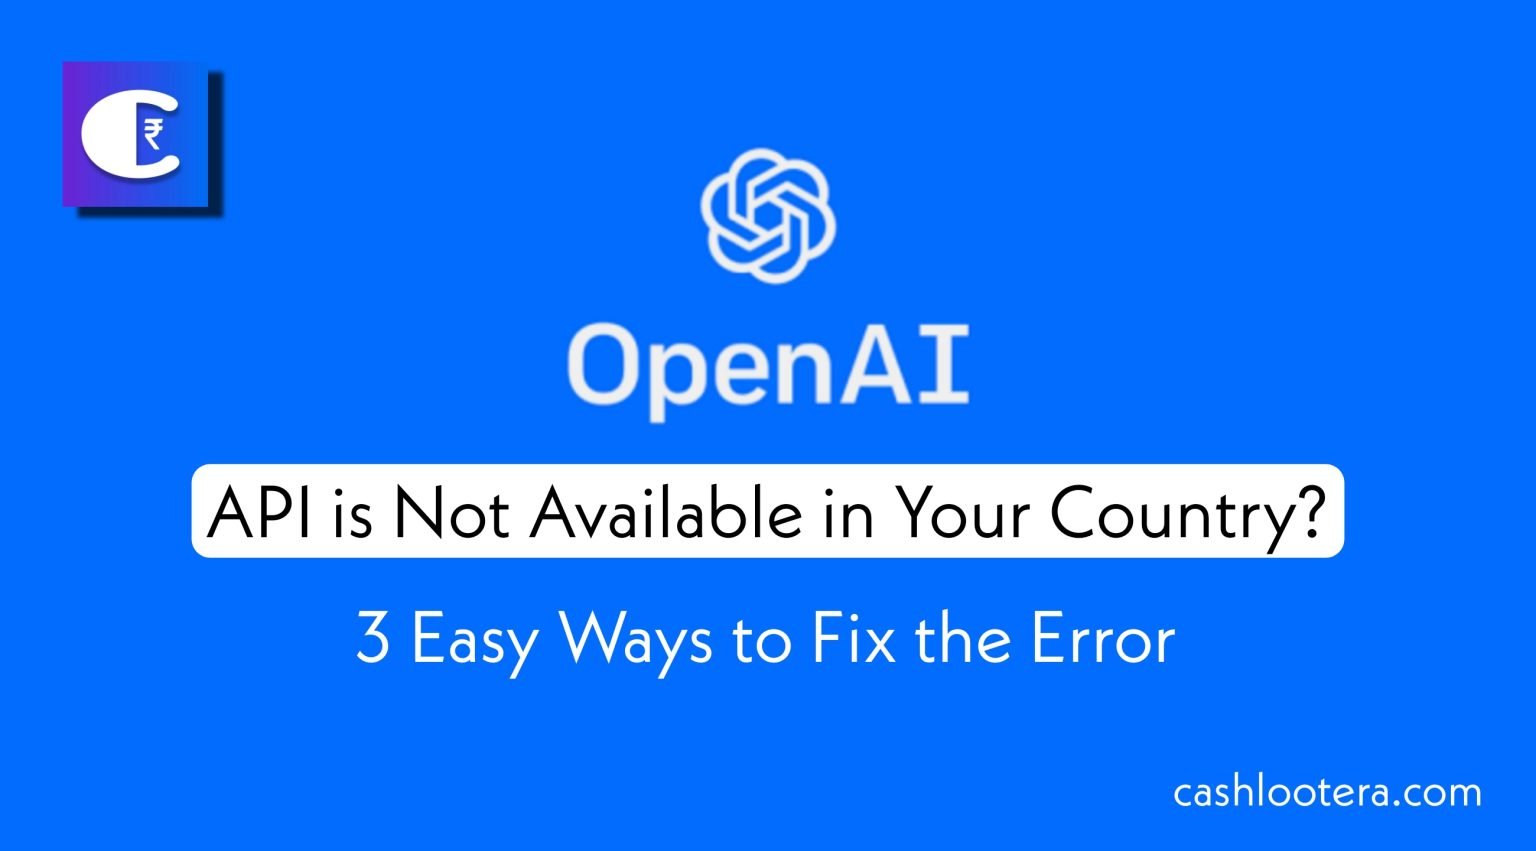 OpenAI’s Services are not Available in Your Country: Fix the Error